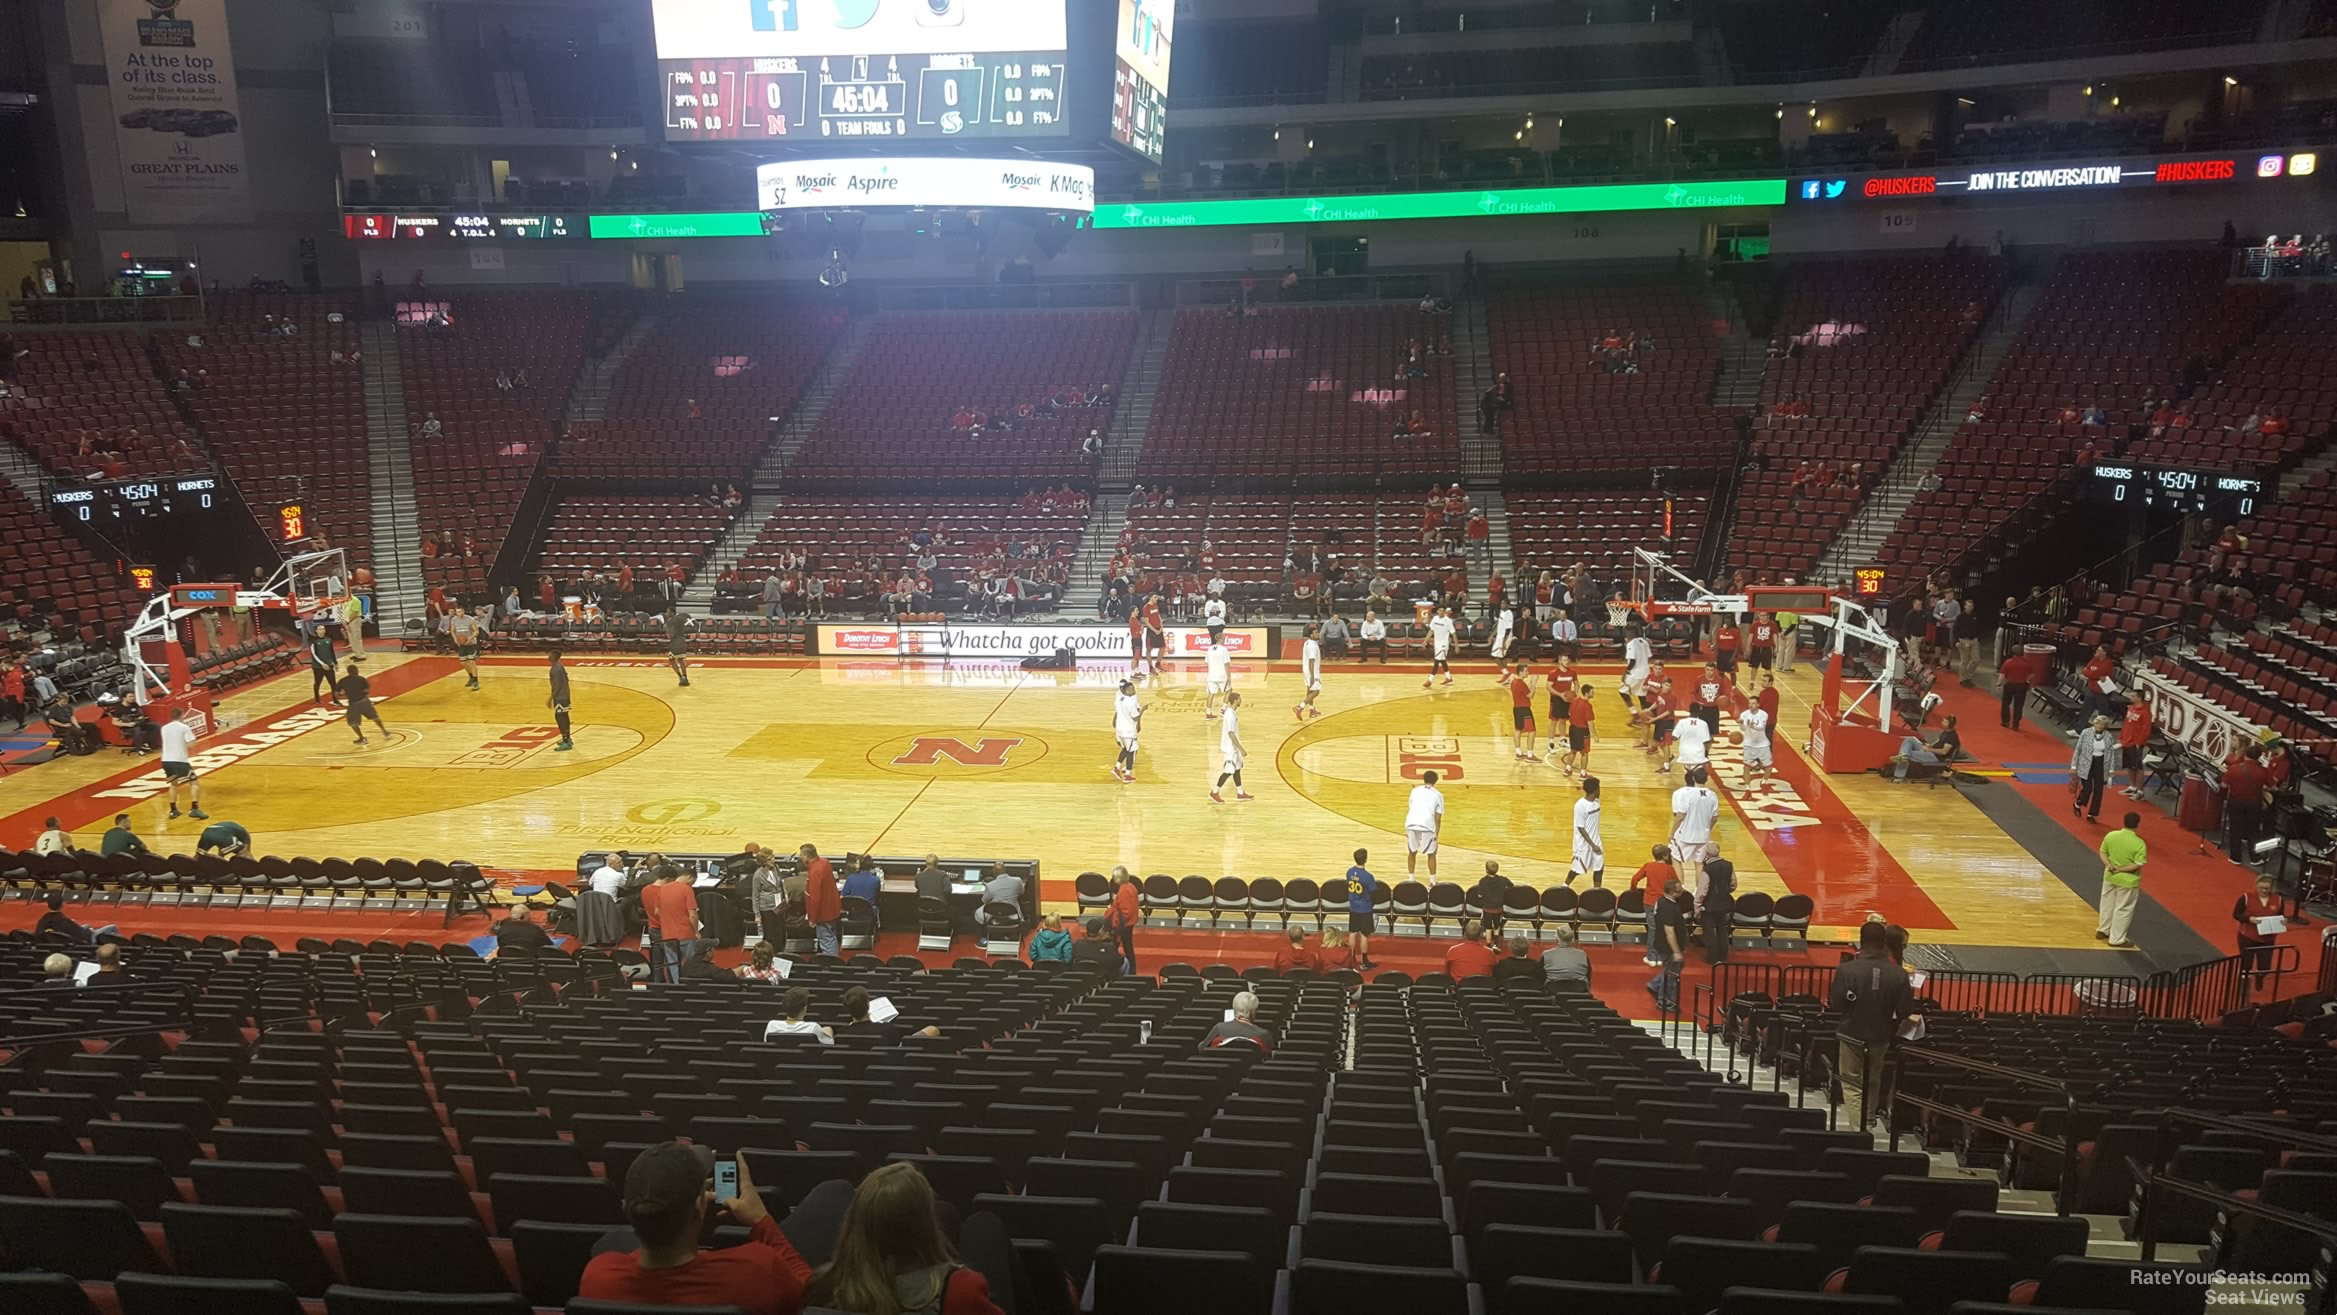 section 106, row 24 seat view  for basketball - pinnacle bank arena